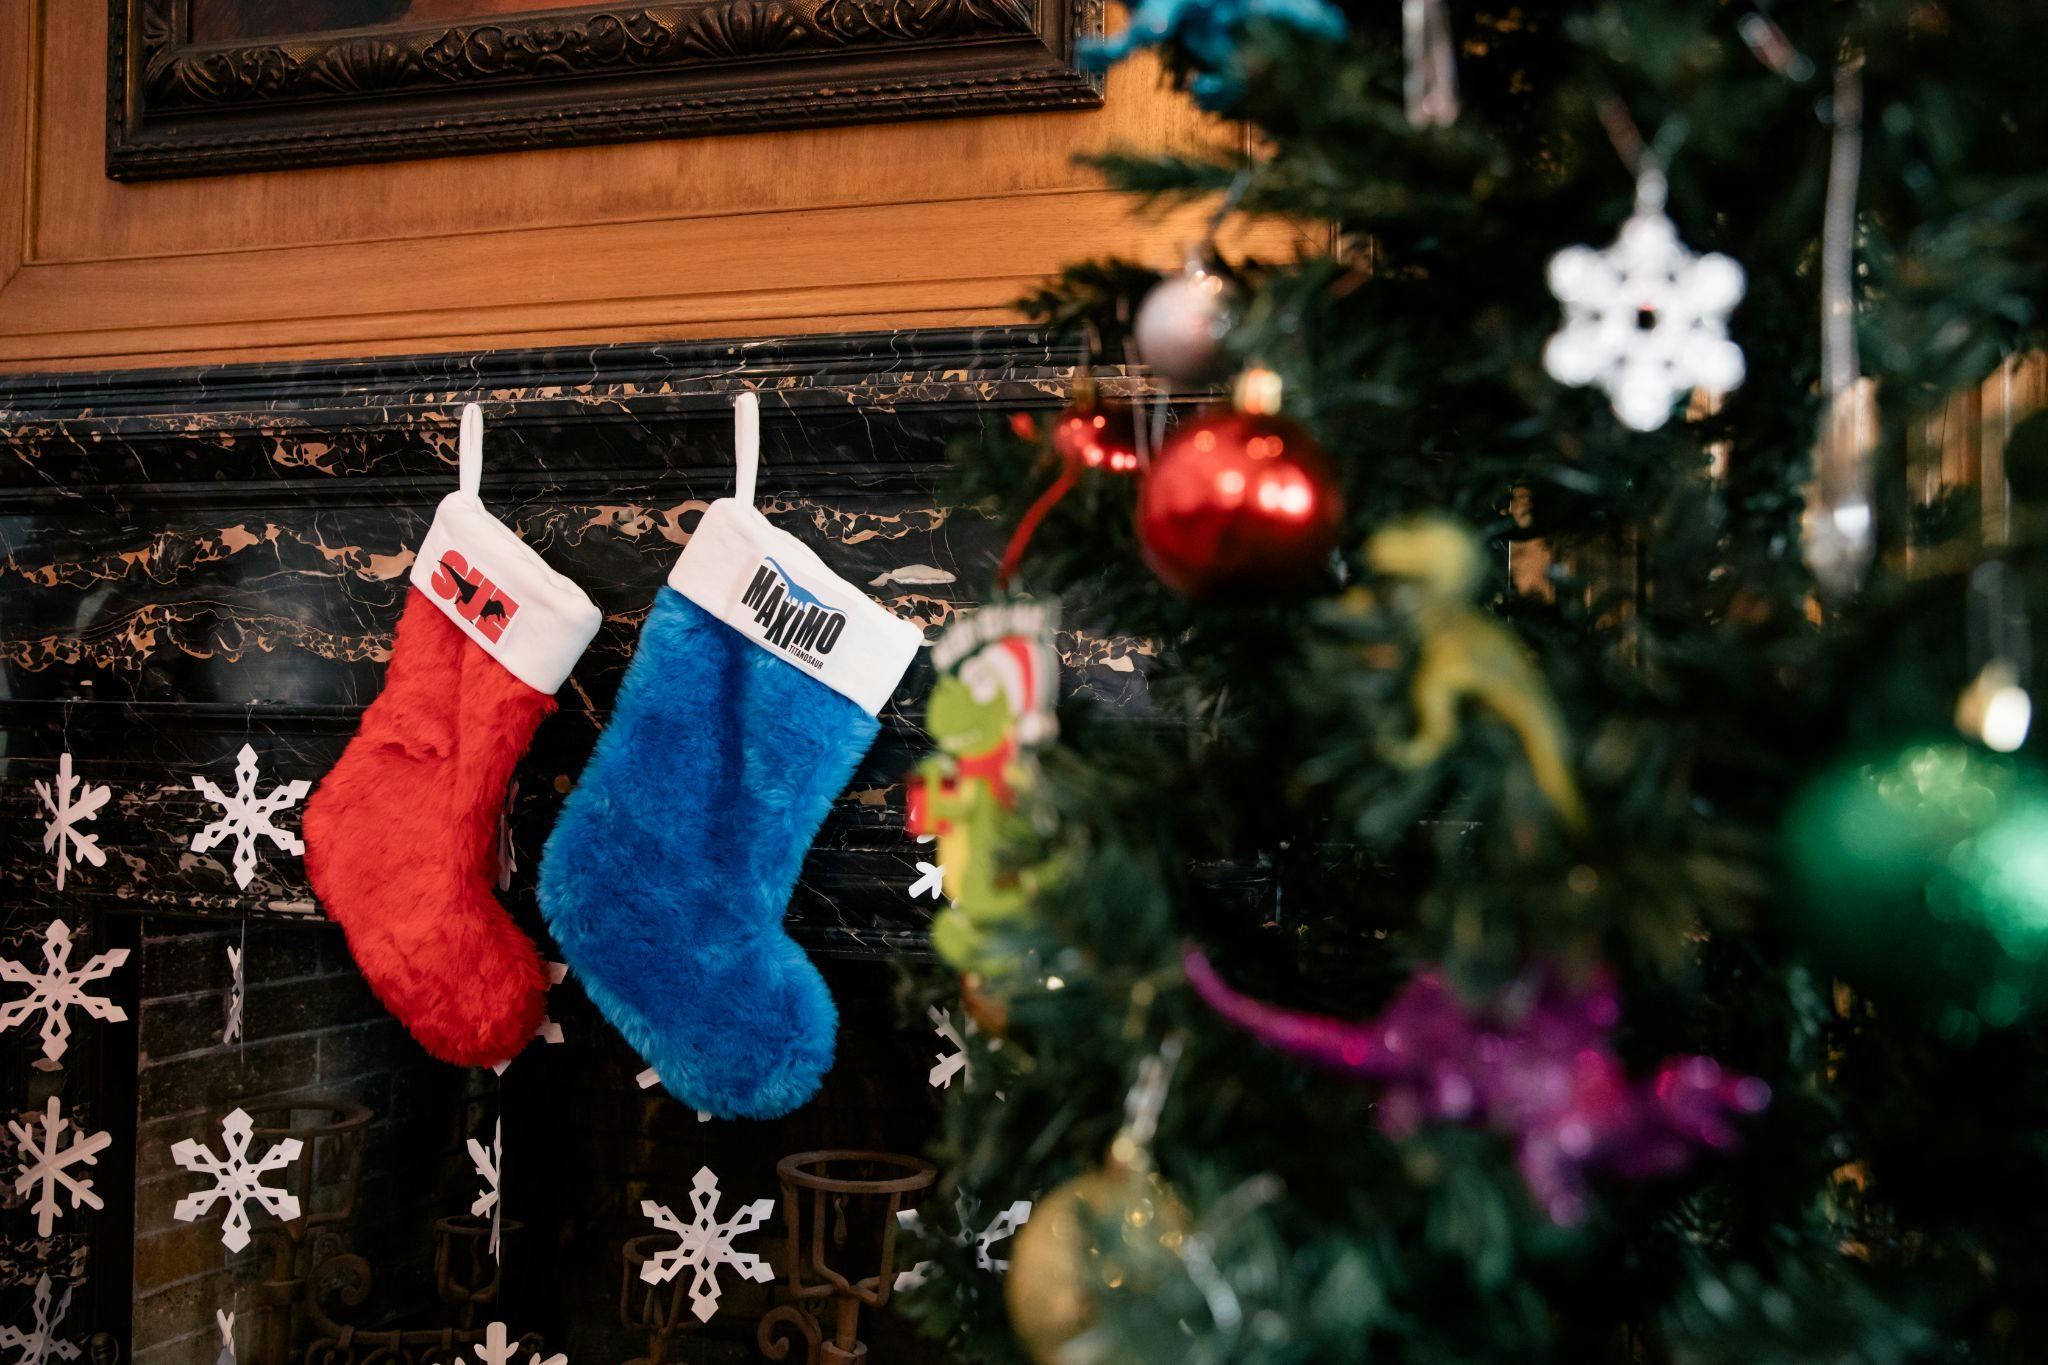 Two Christmas stockings hang from a fireplace mantel– red one with SUE embroidered and a blue one with Maximo embroidered. A Christmas tree is blurred in the foreground to the right.